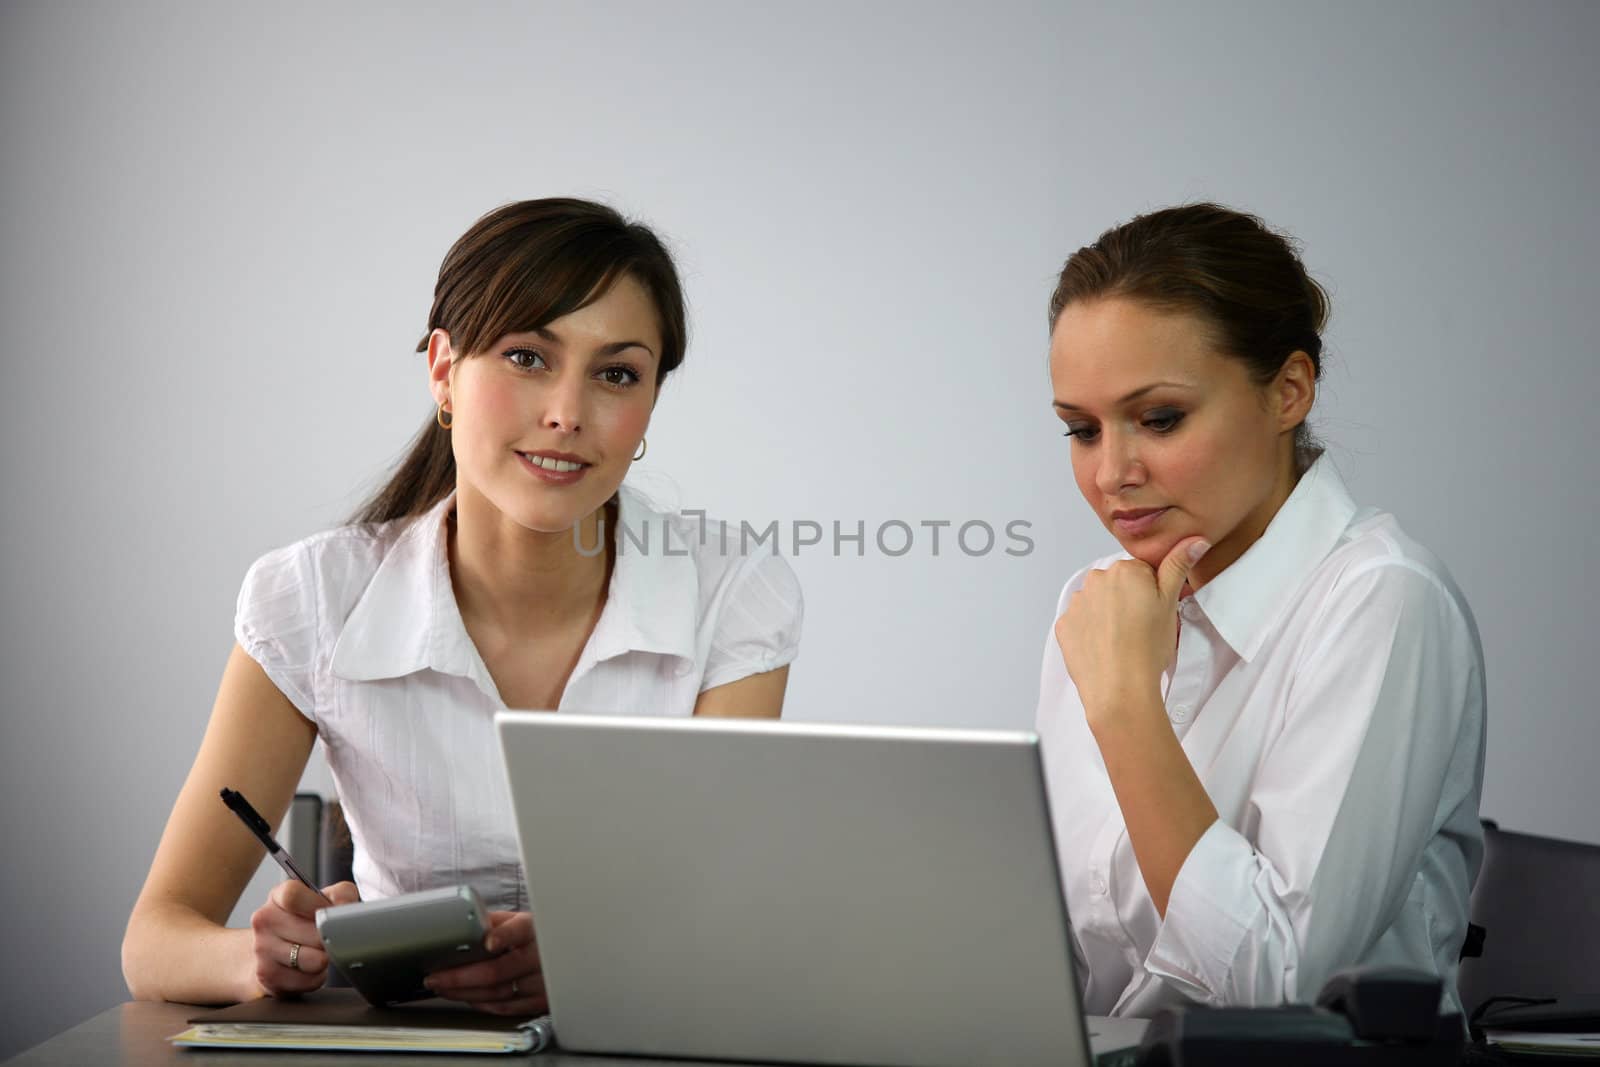 Clerical workers in front of a laptop